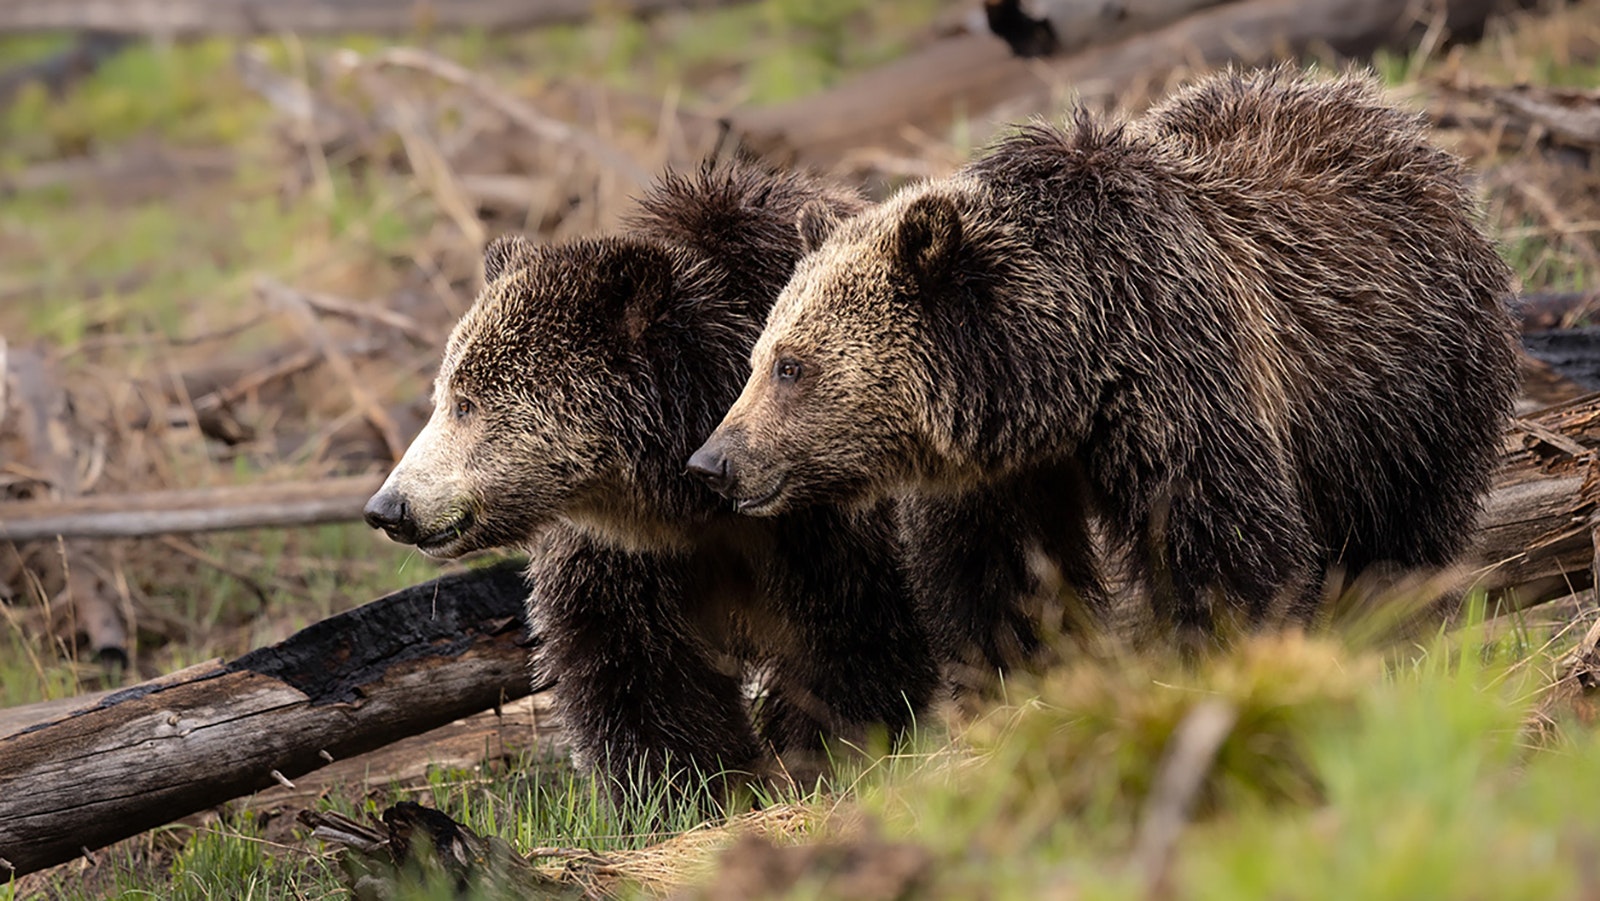 A mother grizzly bear and her three year old cub stand shoulder to shoulder, showing the similarities between their coloration. By 3 years old, most grizzly bears have been on their own for a year already, though this mother tends to keep her cubs an extra year, which accounts for the similarity of size between the two. Only about a week later the two had separated and gone their separate ways.